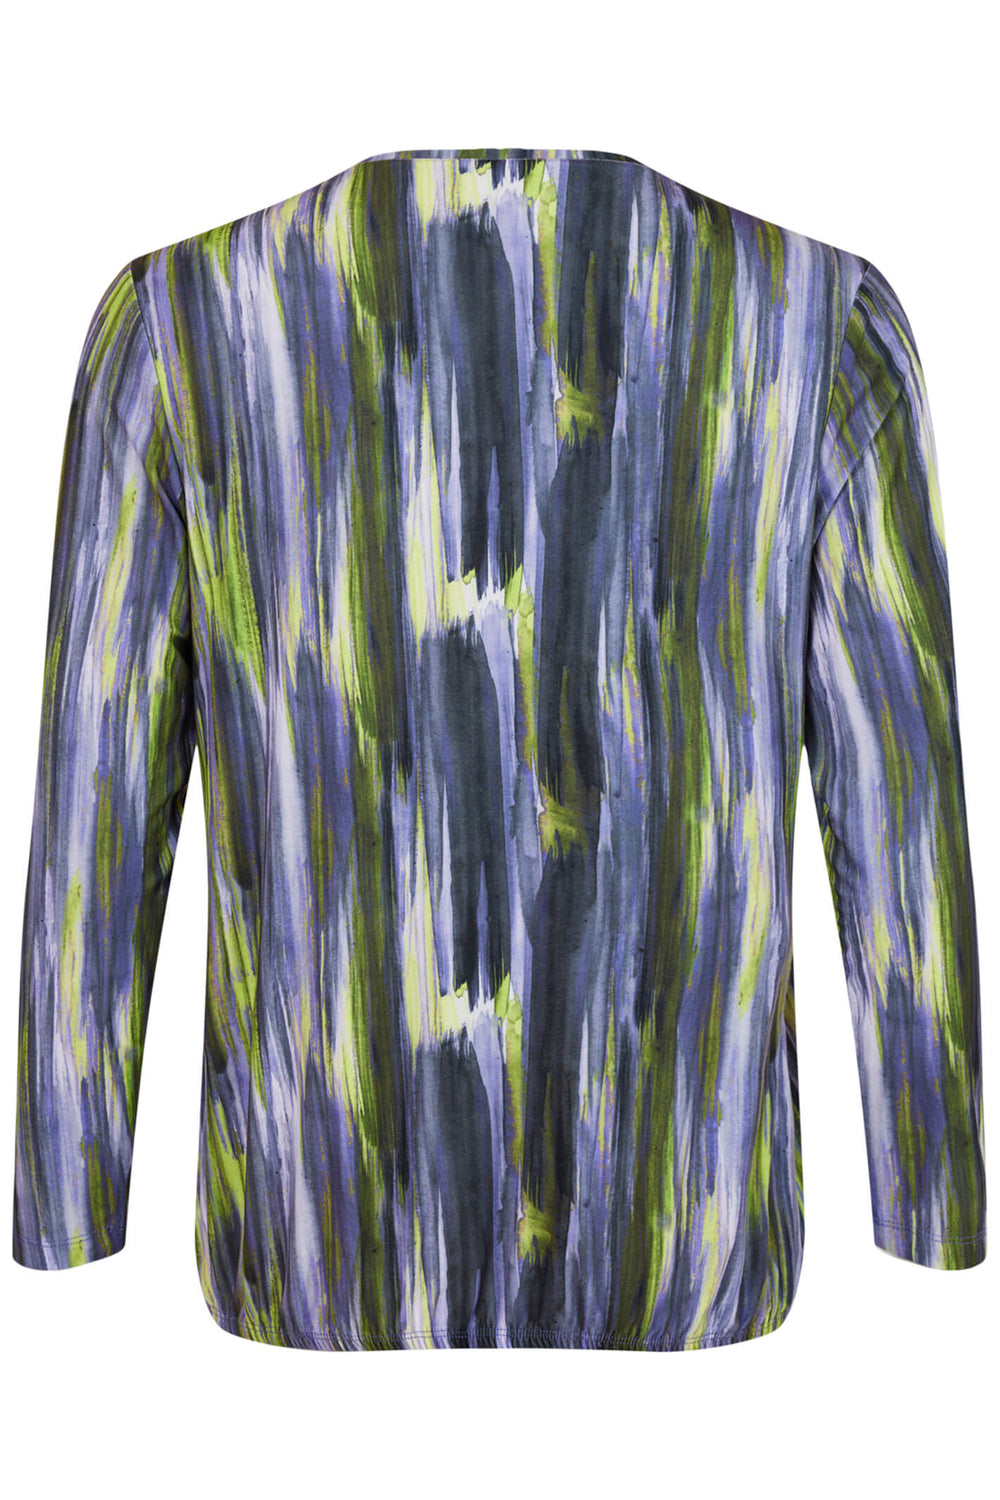 Sunday 6907 520 Purple Green Print Top - Experience Boutique